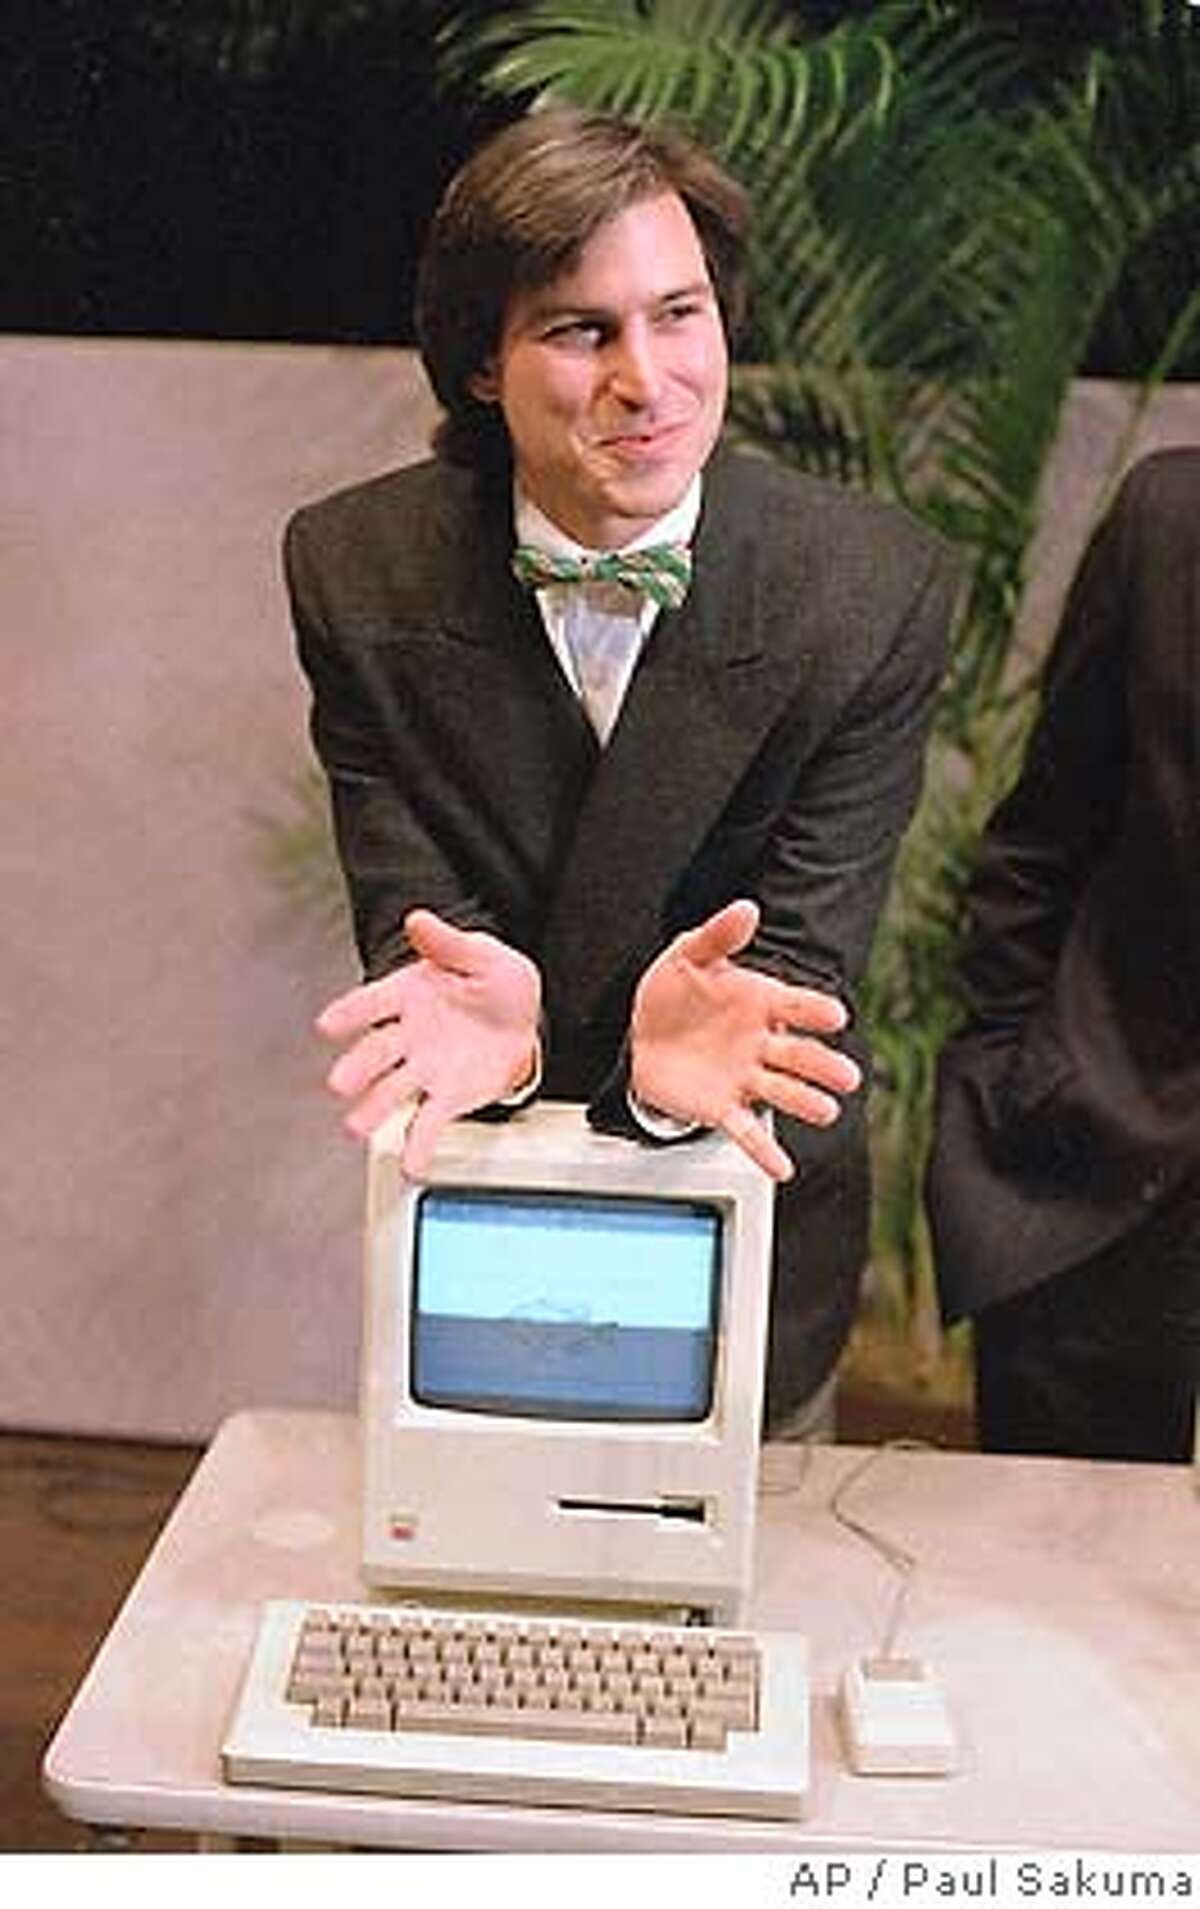 Steven Jobs, chairman of the board of Apple Computer, leans on the new "Macintosh" personal comptuer following a shareholder's meeting Jan. 24, 1984 in Cupertino, Ca. The Macintosh, priced at $2,495, is challenfing IBM in the personal computer market. (AP Photo/Paul Sakuma)